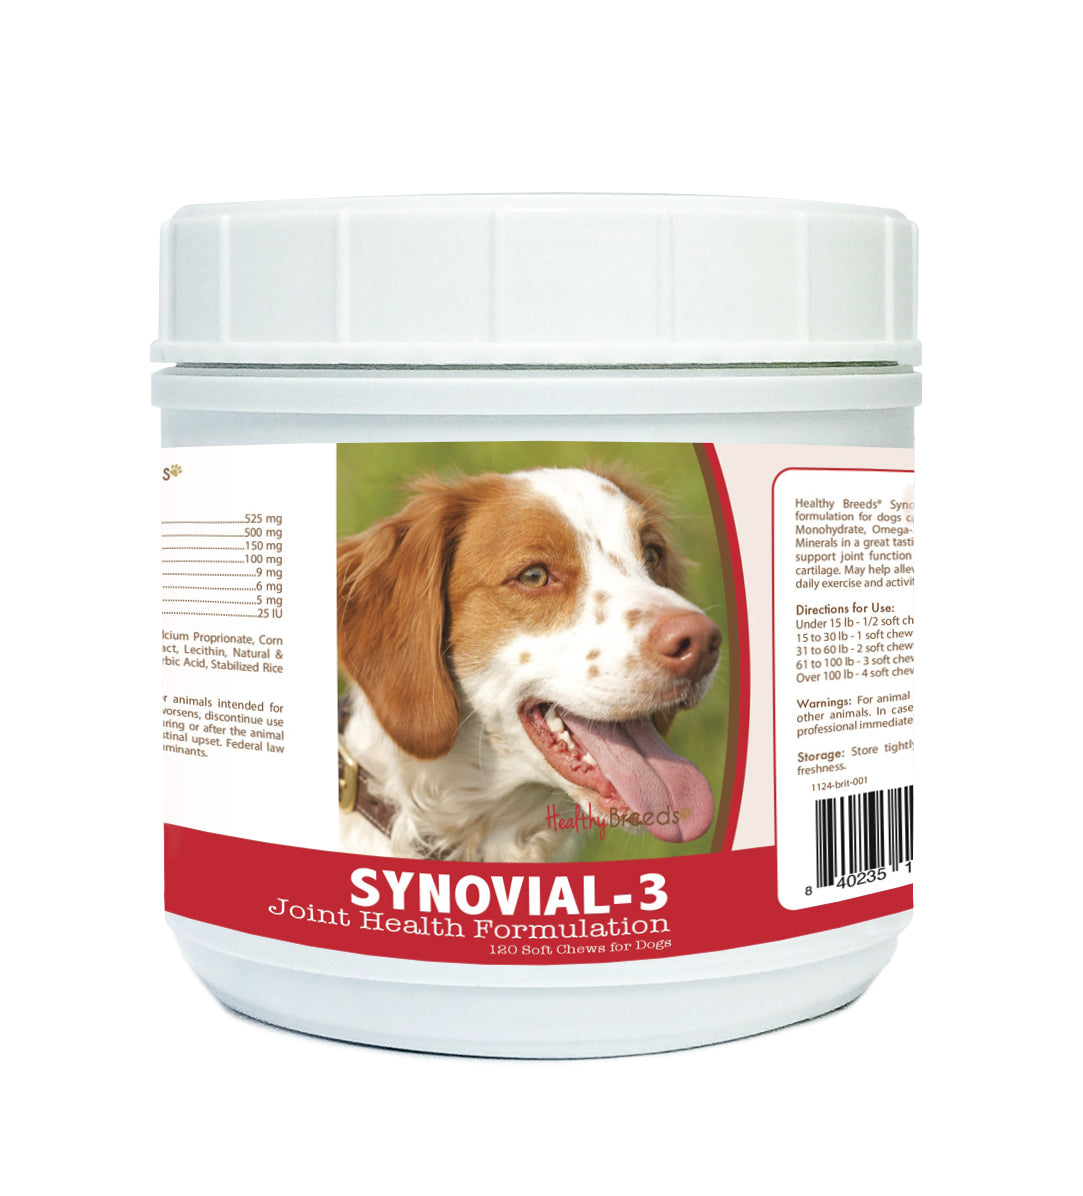 Brittany Synovial-3 Joint Health Formulation Soft Chews 120 Count